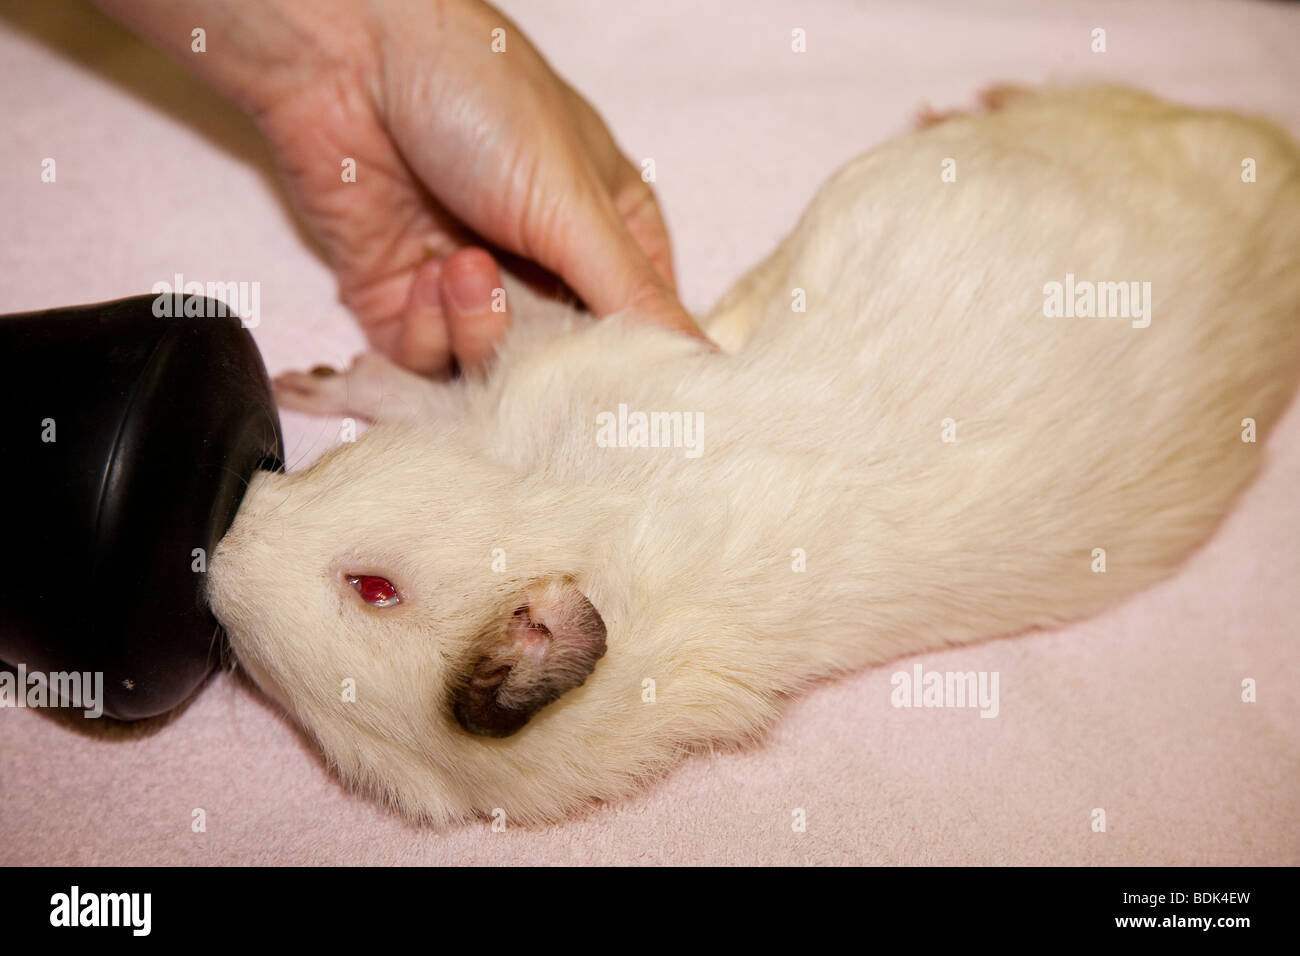 Guinea Pig Anaesthetic by Mask Induction Stock Photo